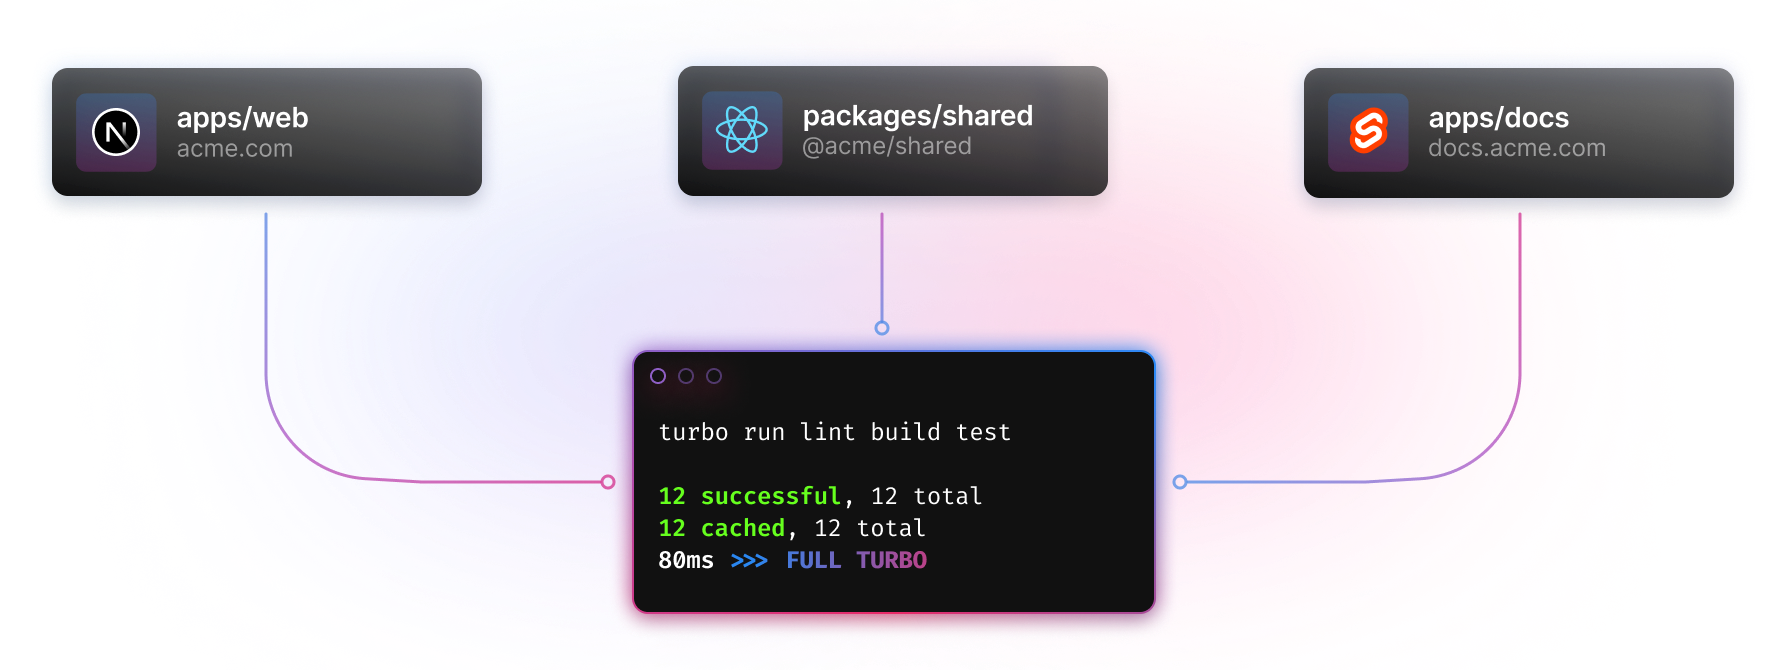 12 tasks are being ran in 3 packages, resulting in a ">>> FULL TURBO" cache hit. The total time it takes to restore these tasks from cache is 80 milliseconds.